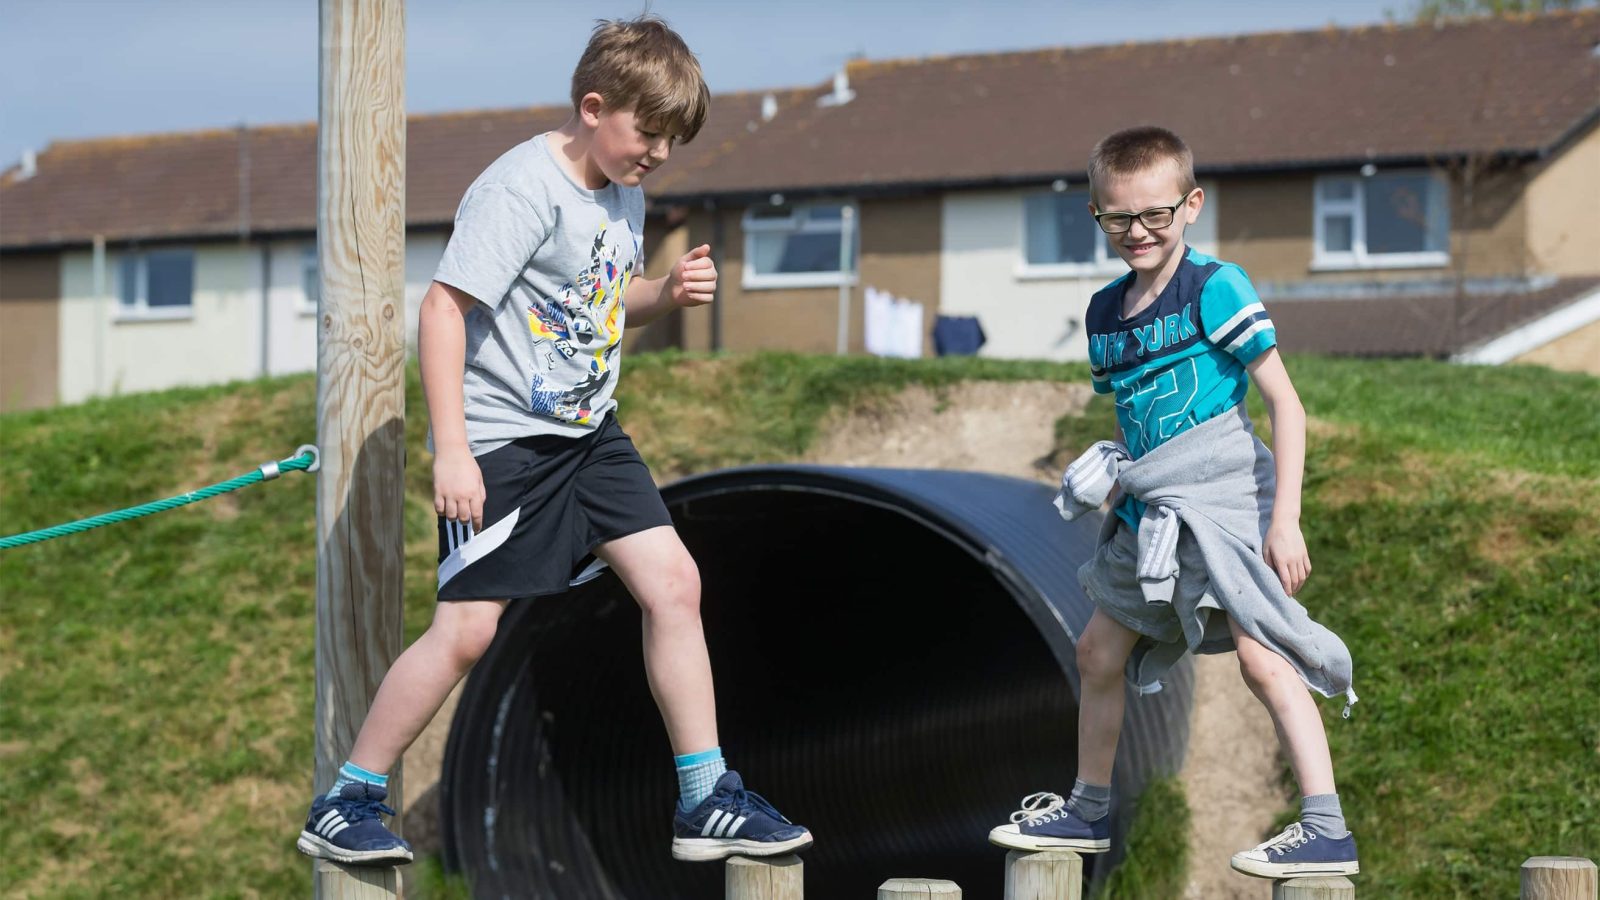 Two boys enjoying a sunny day outdoors on a playground, one standing on a tunnel and the other next to it, both smiling and reflecting the joyful brand strategy of youthfulness.